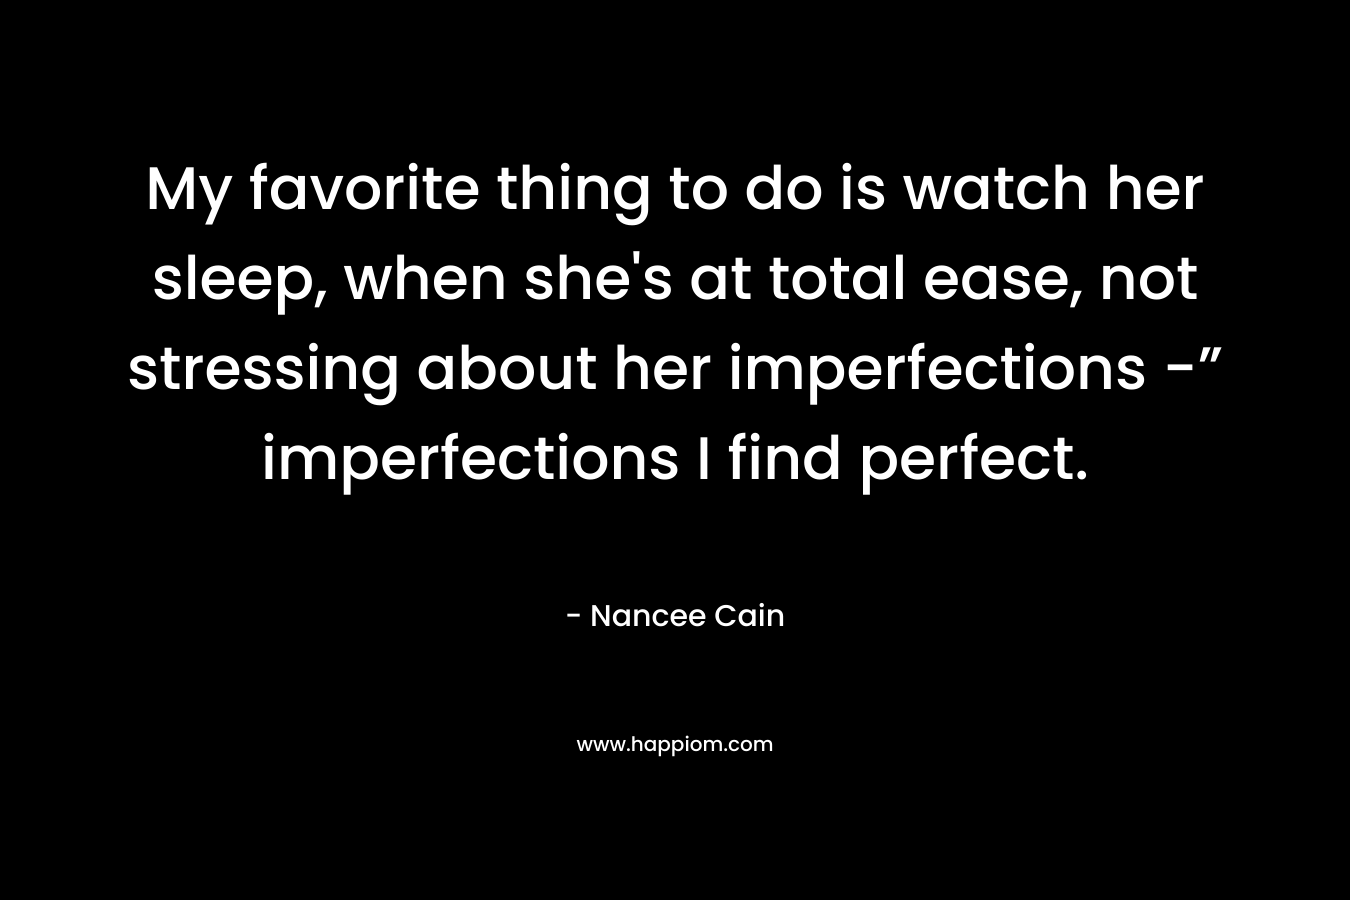 My favorite thing to do is watch her sleep, when she's at total ease, not stressing about her imperfections -” imperfections I find perfect.